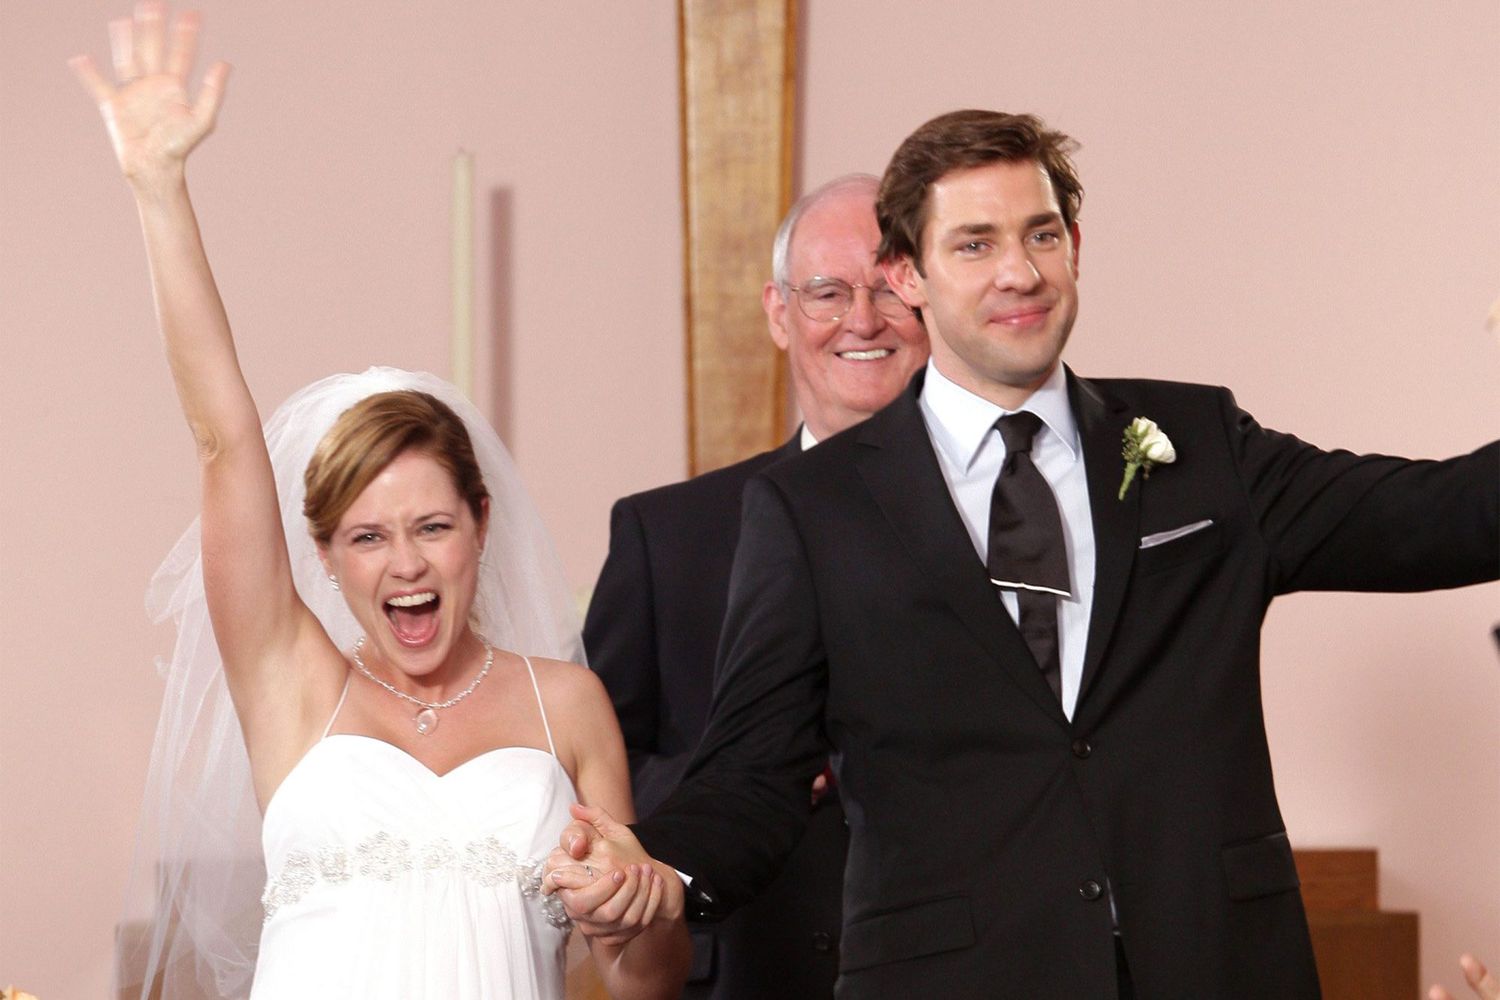 Pam and Jim. The Office wedding. 